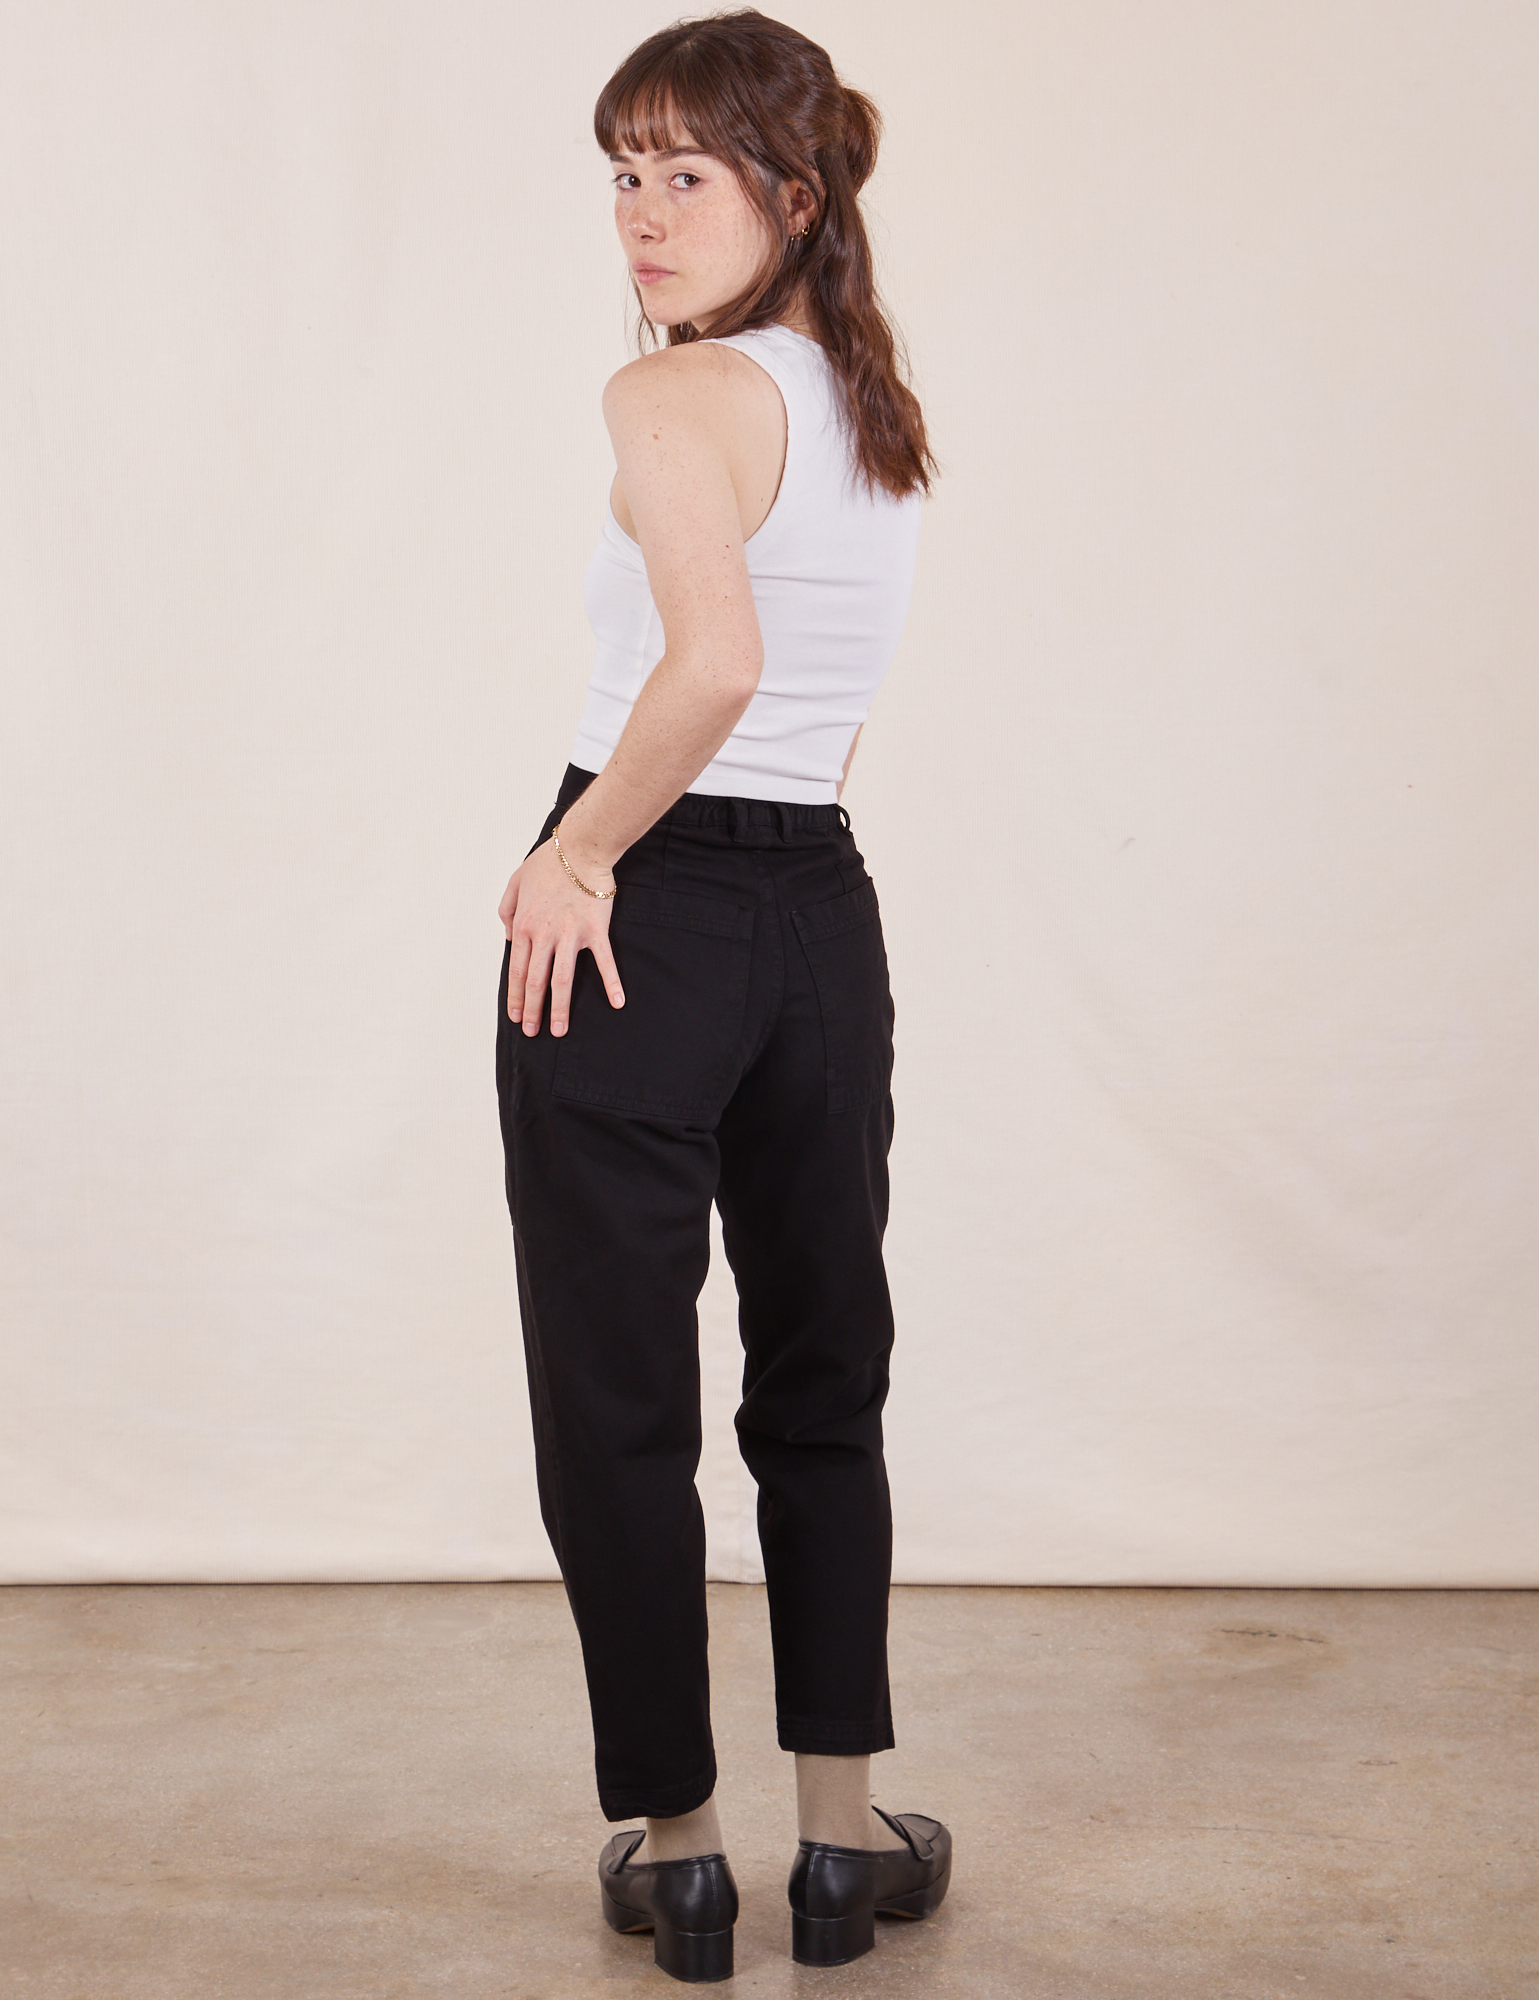 Back view of Petite Pencil Pants in Basic Black and vintage off-white Cropped Tank Top on Hana